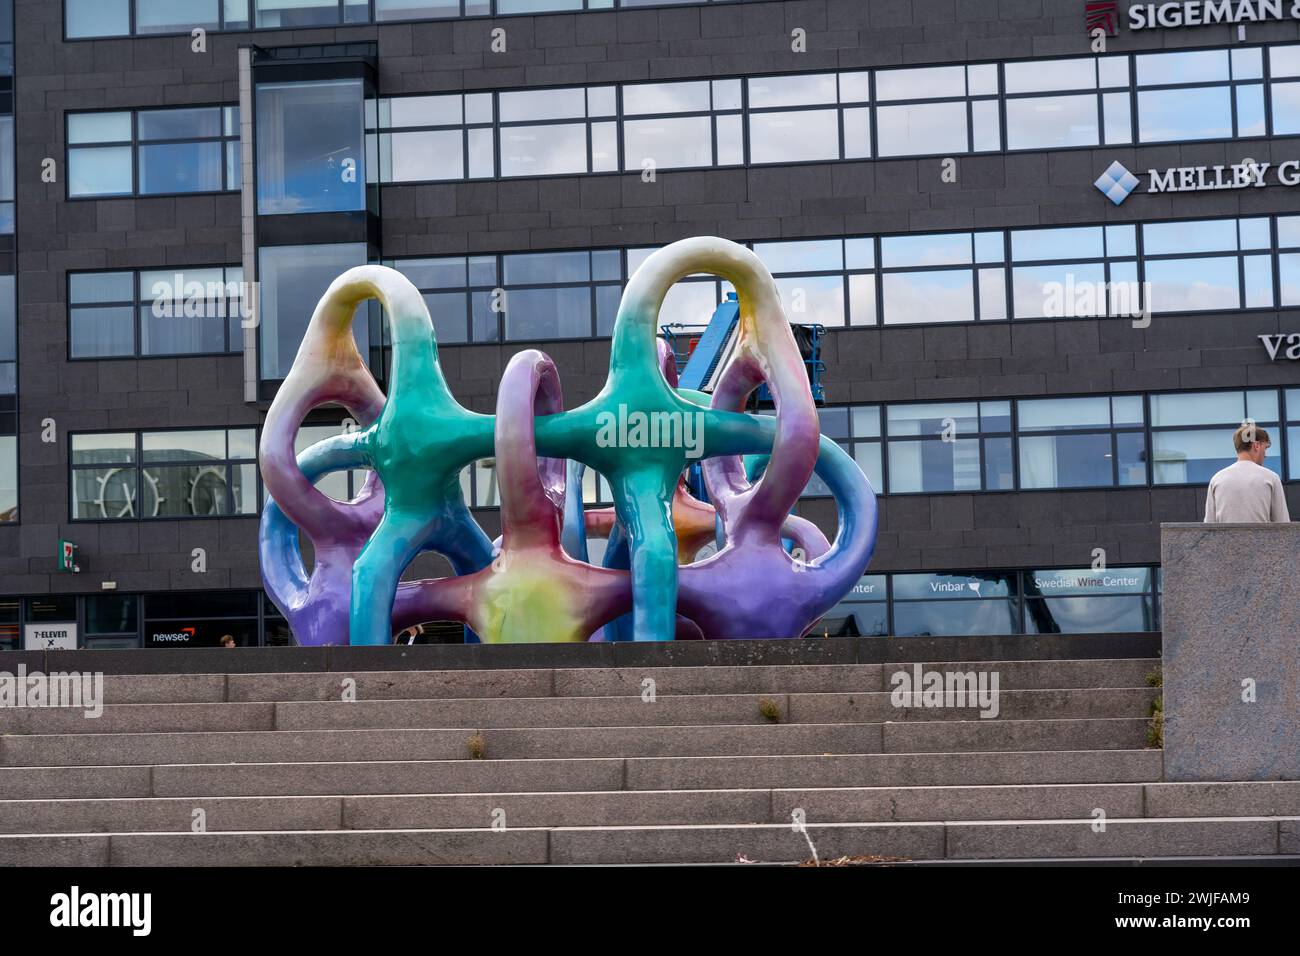 The Spectral Self Container sculpture in Malmo, Sweden Stock Photo